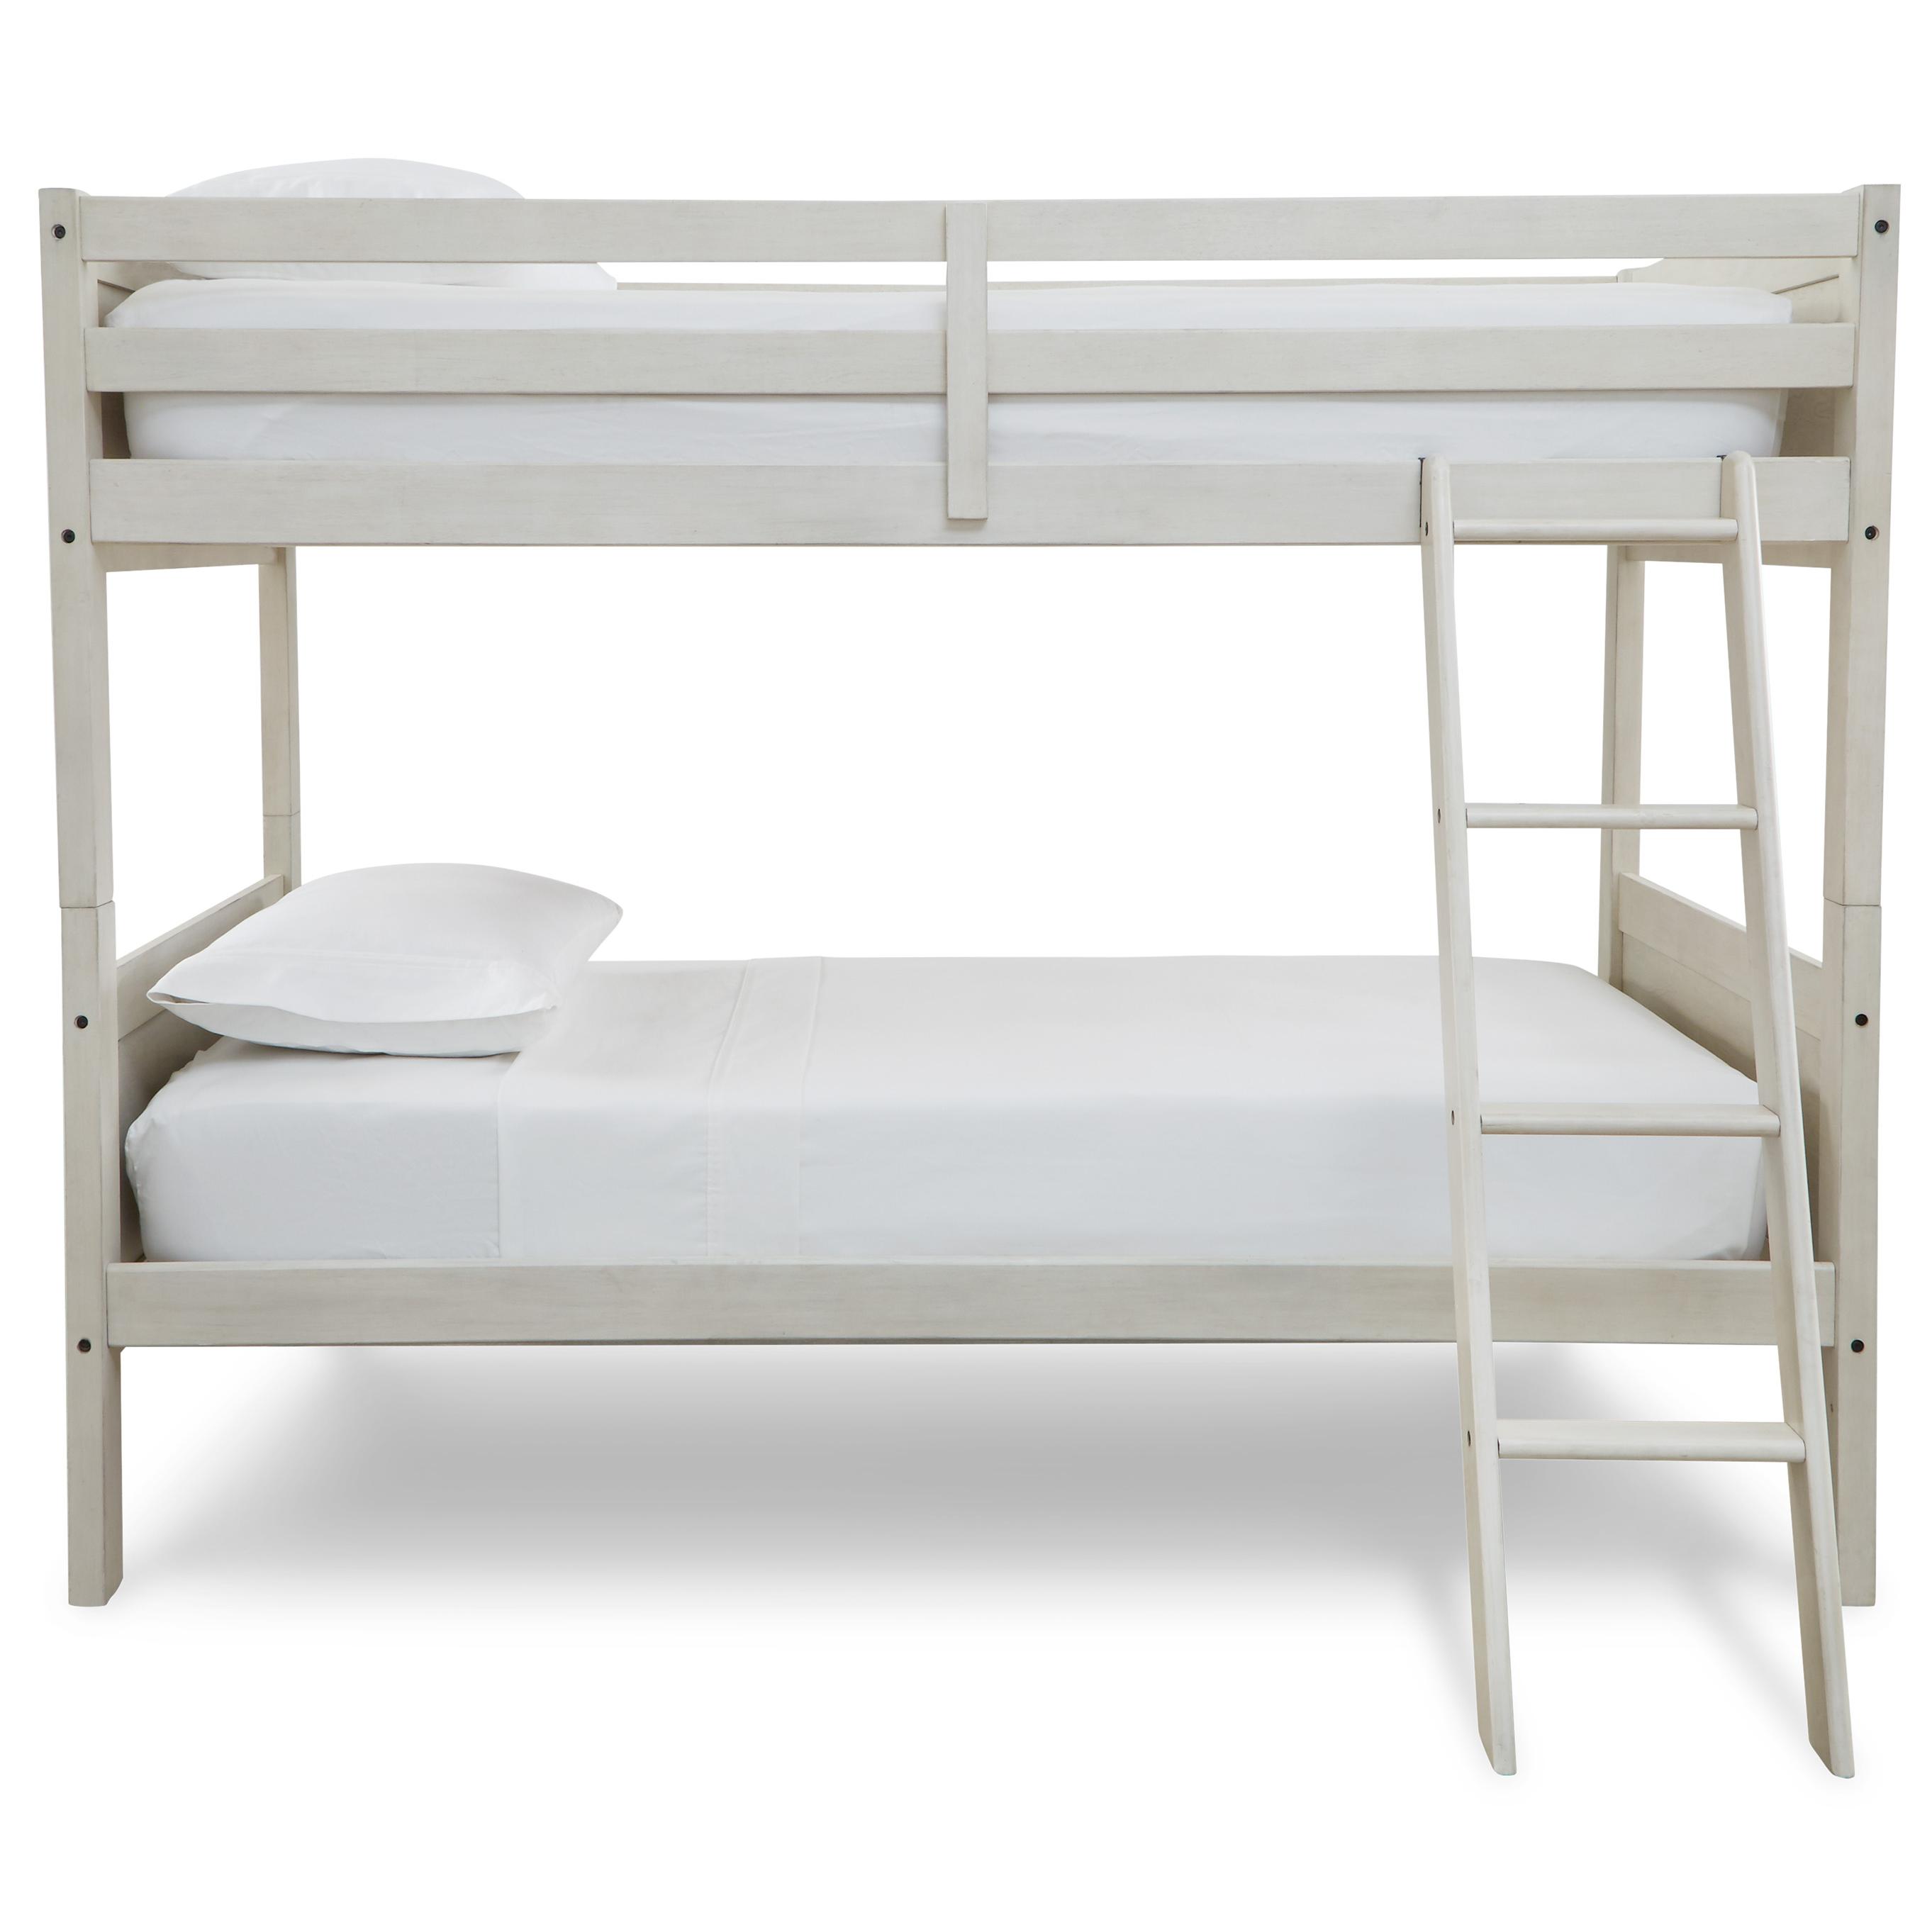 Signature Design by Ashley Kids Beds Bunk Bed B742-59 IMAGE 2